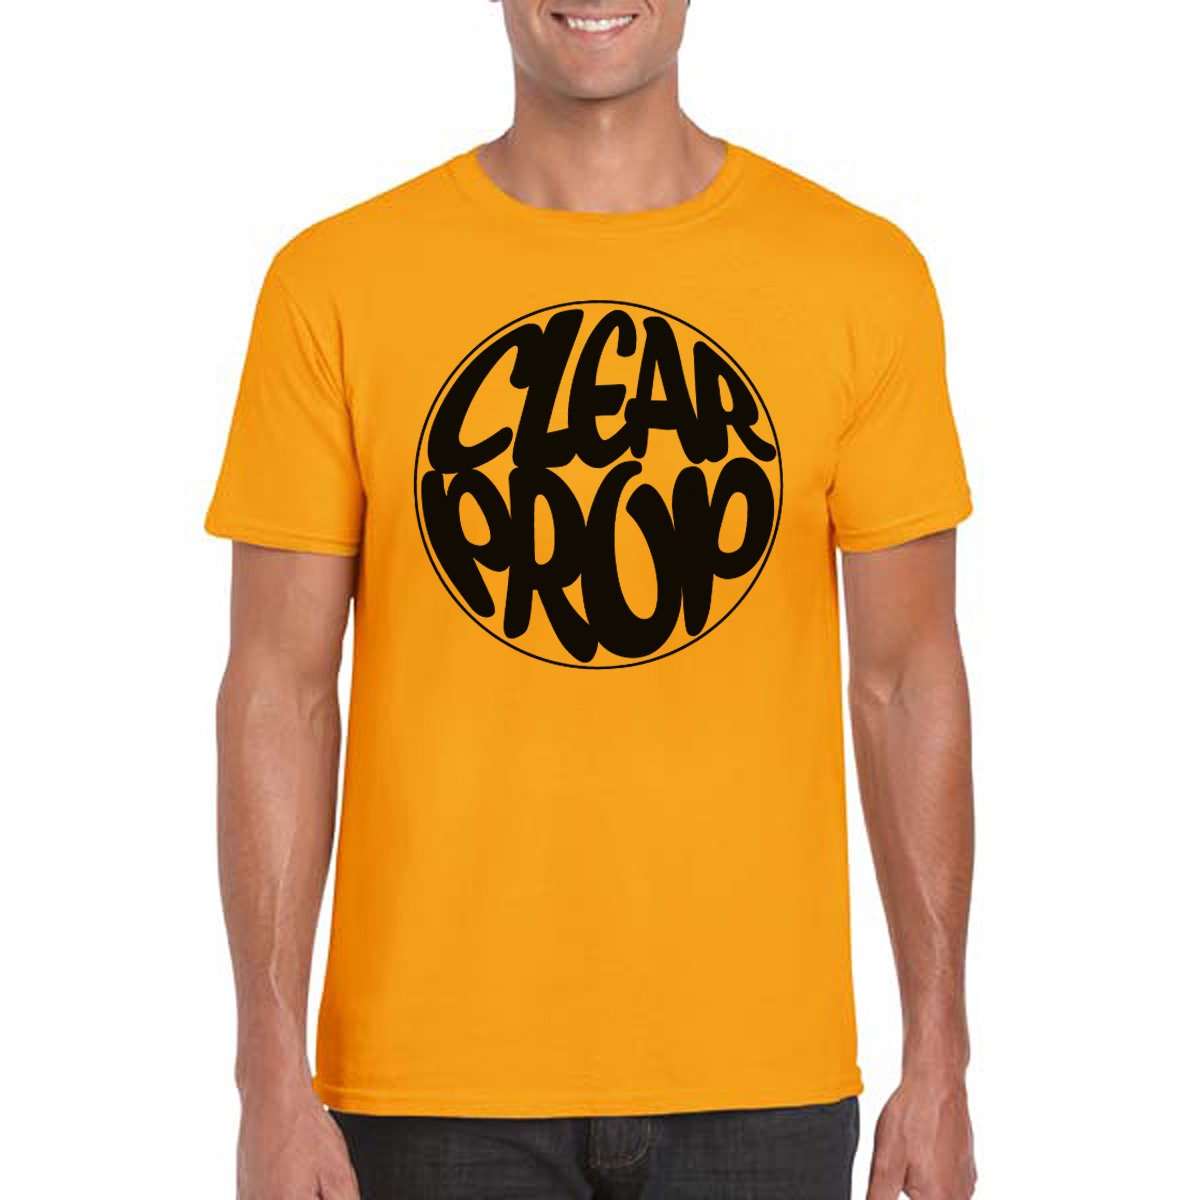 CLEAR PROP Semi-Fitted Unisex T-Shirt